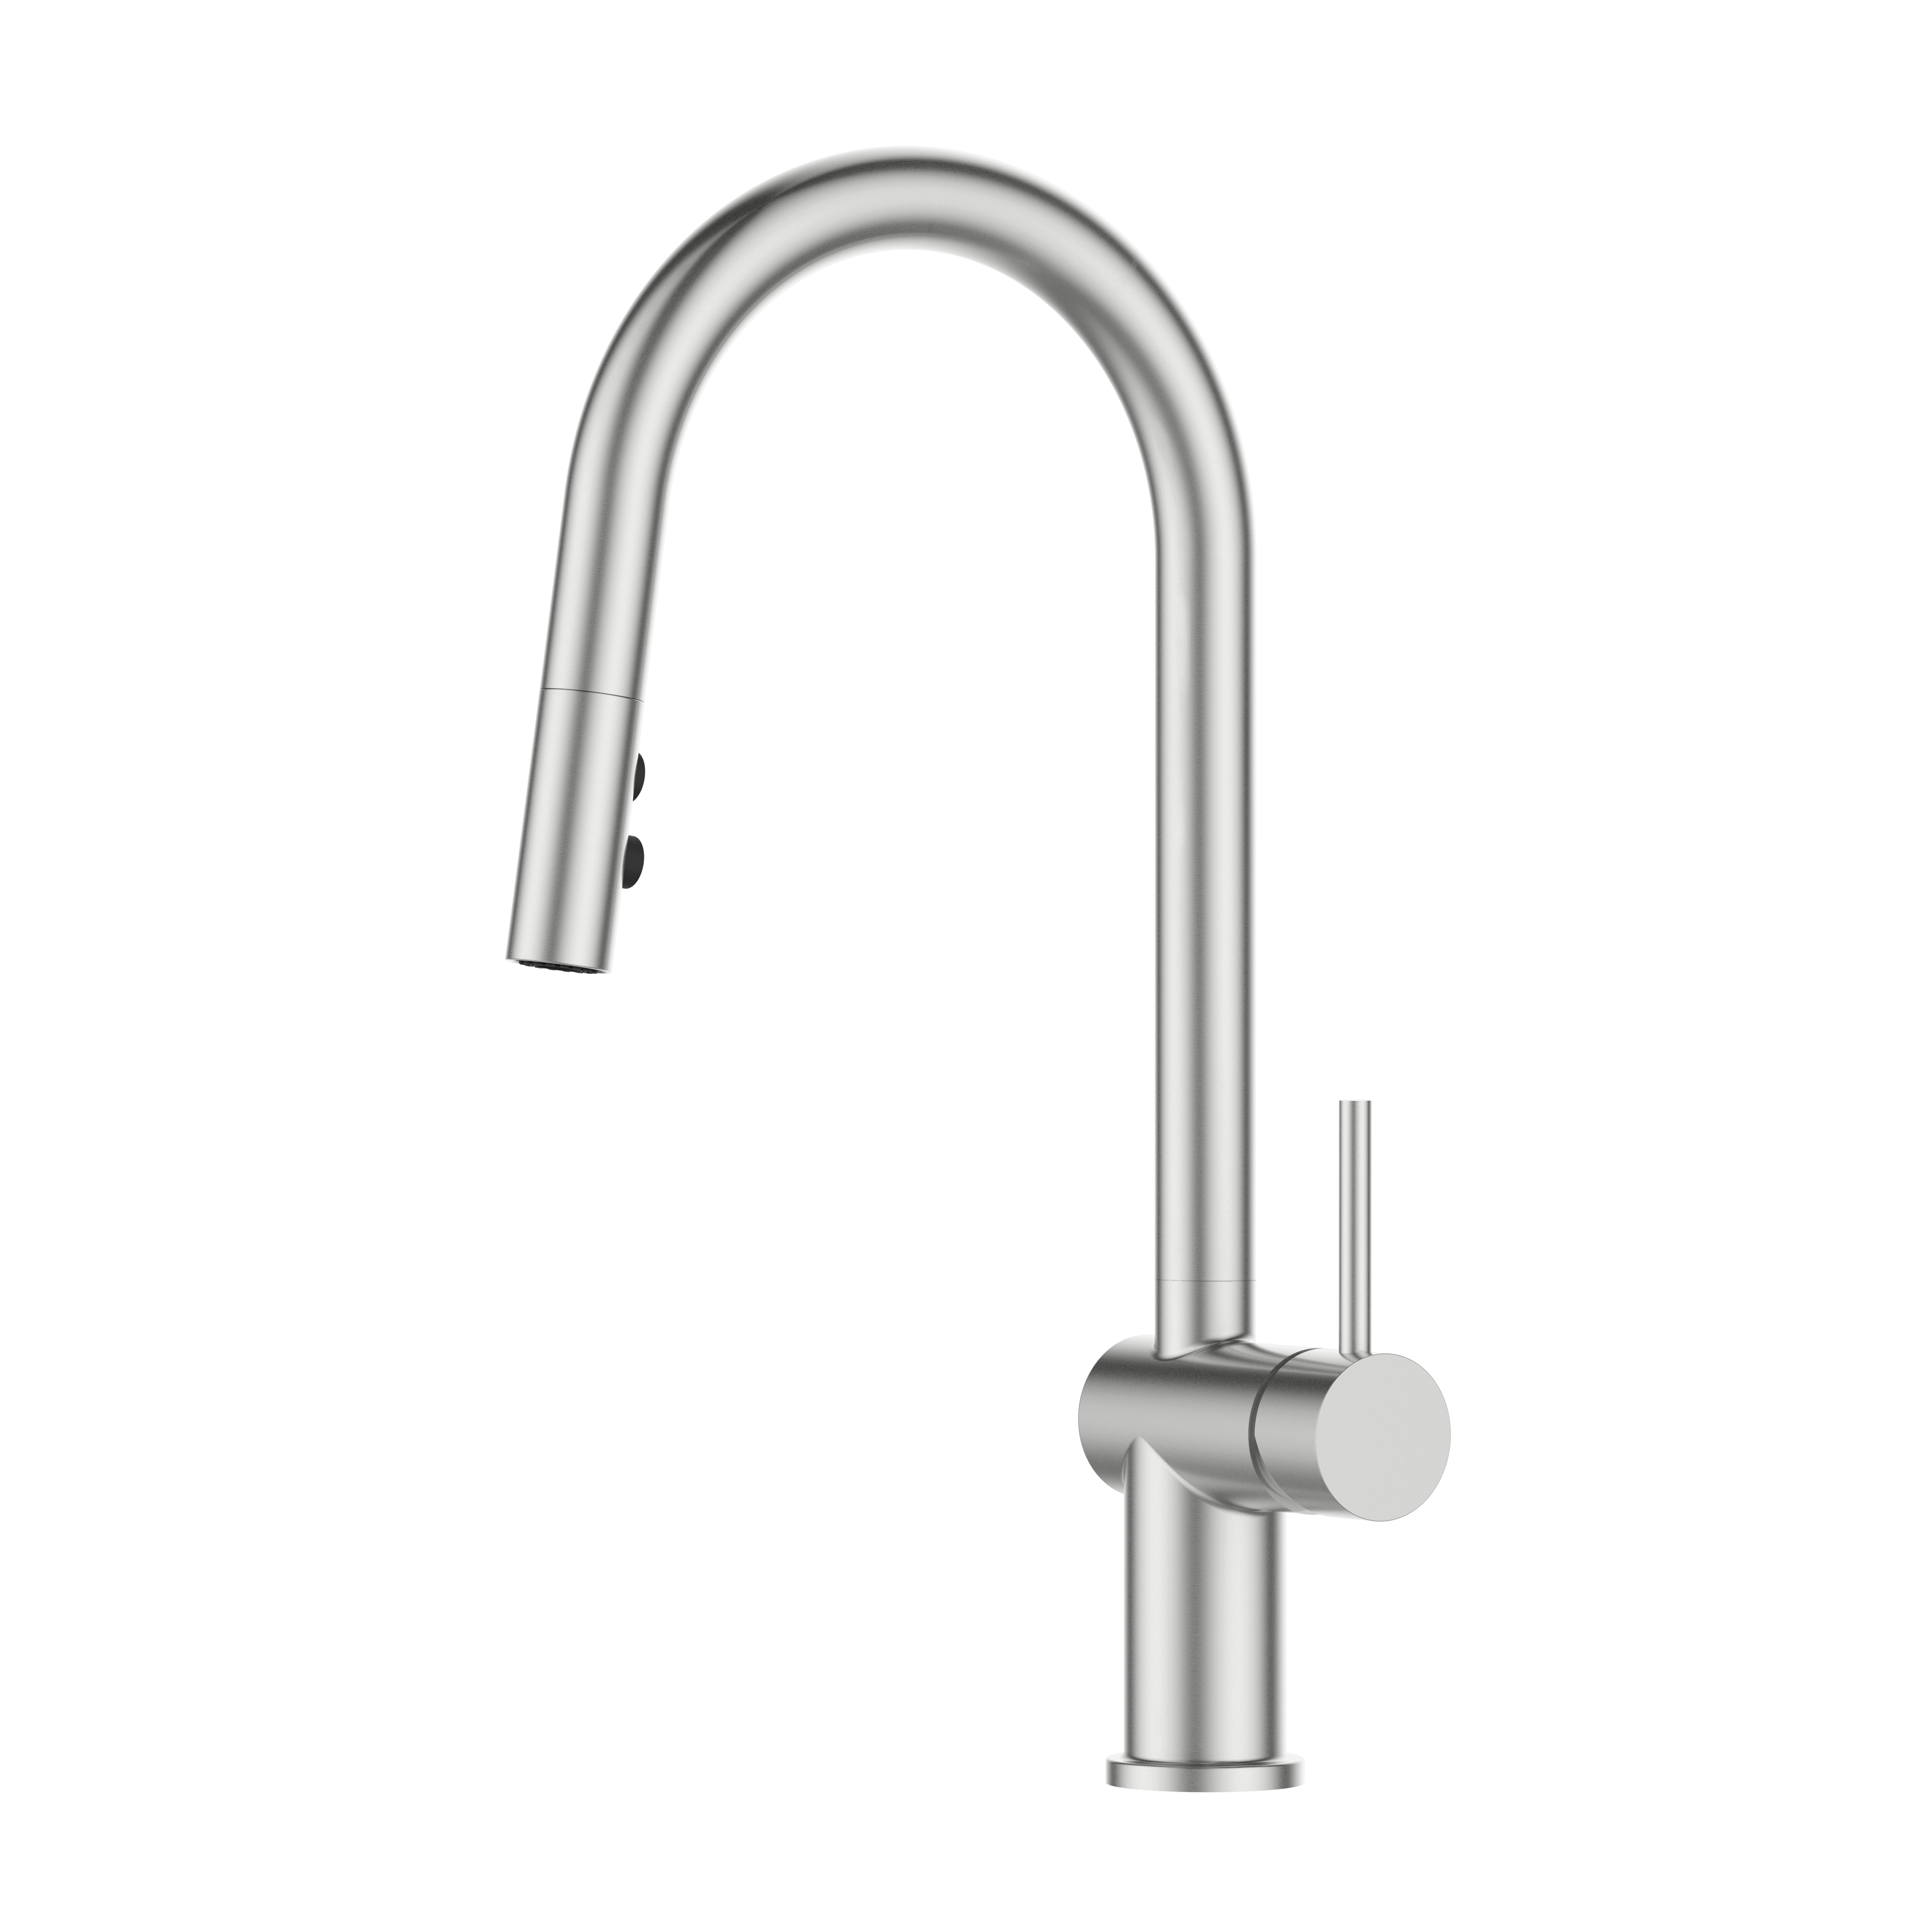 CUPC Certificate Kitchen Faucet Material Brushed Nickel